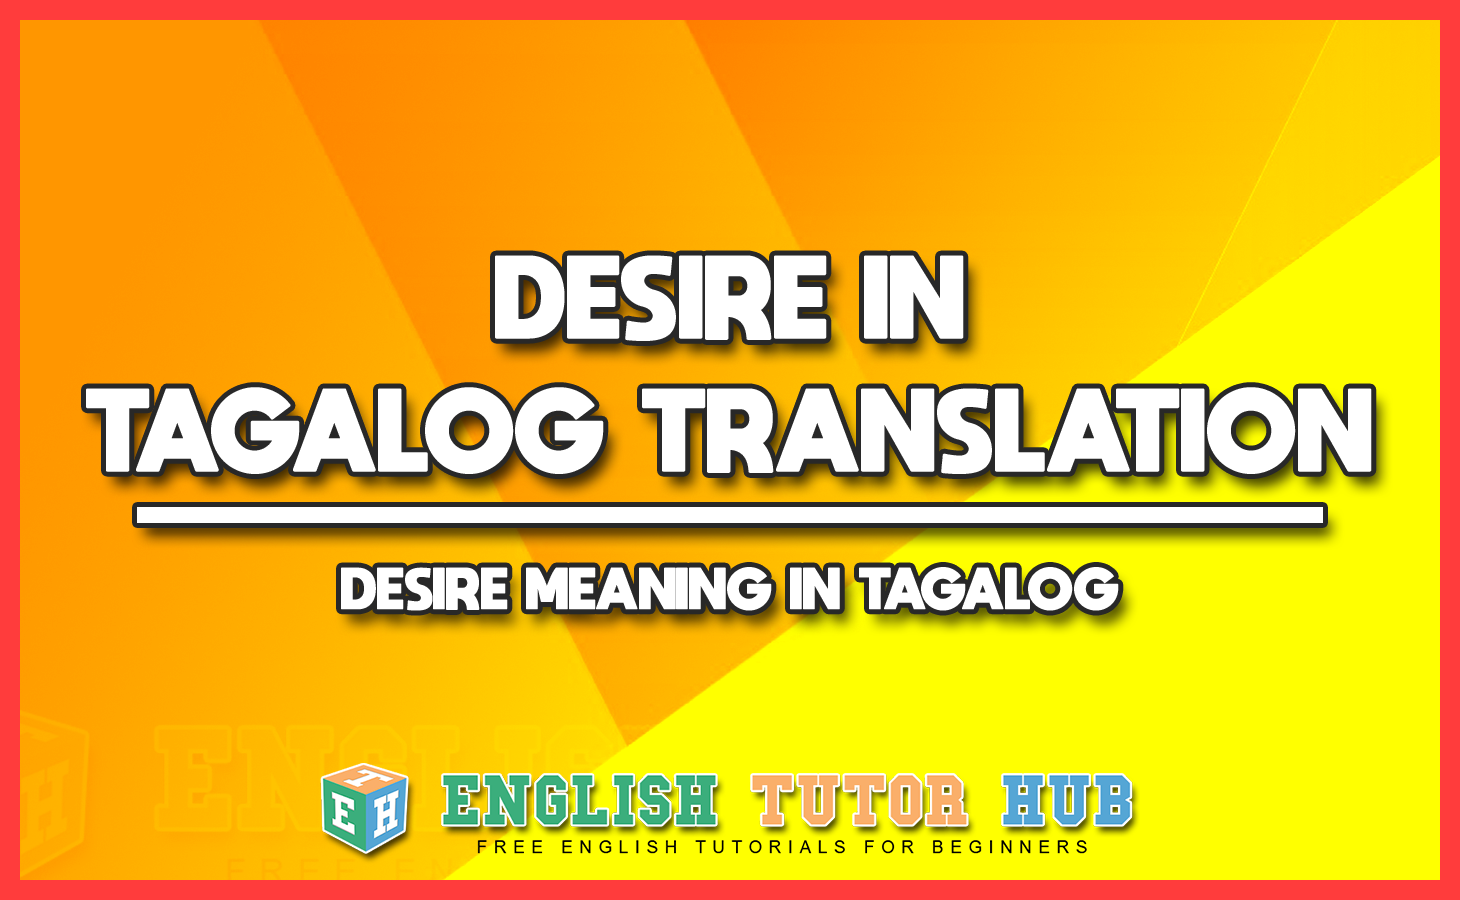 DESIRE IN TAGALOG TRANSLATION - DESIRE MEANING IN TAGALOG